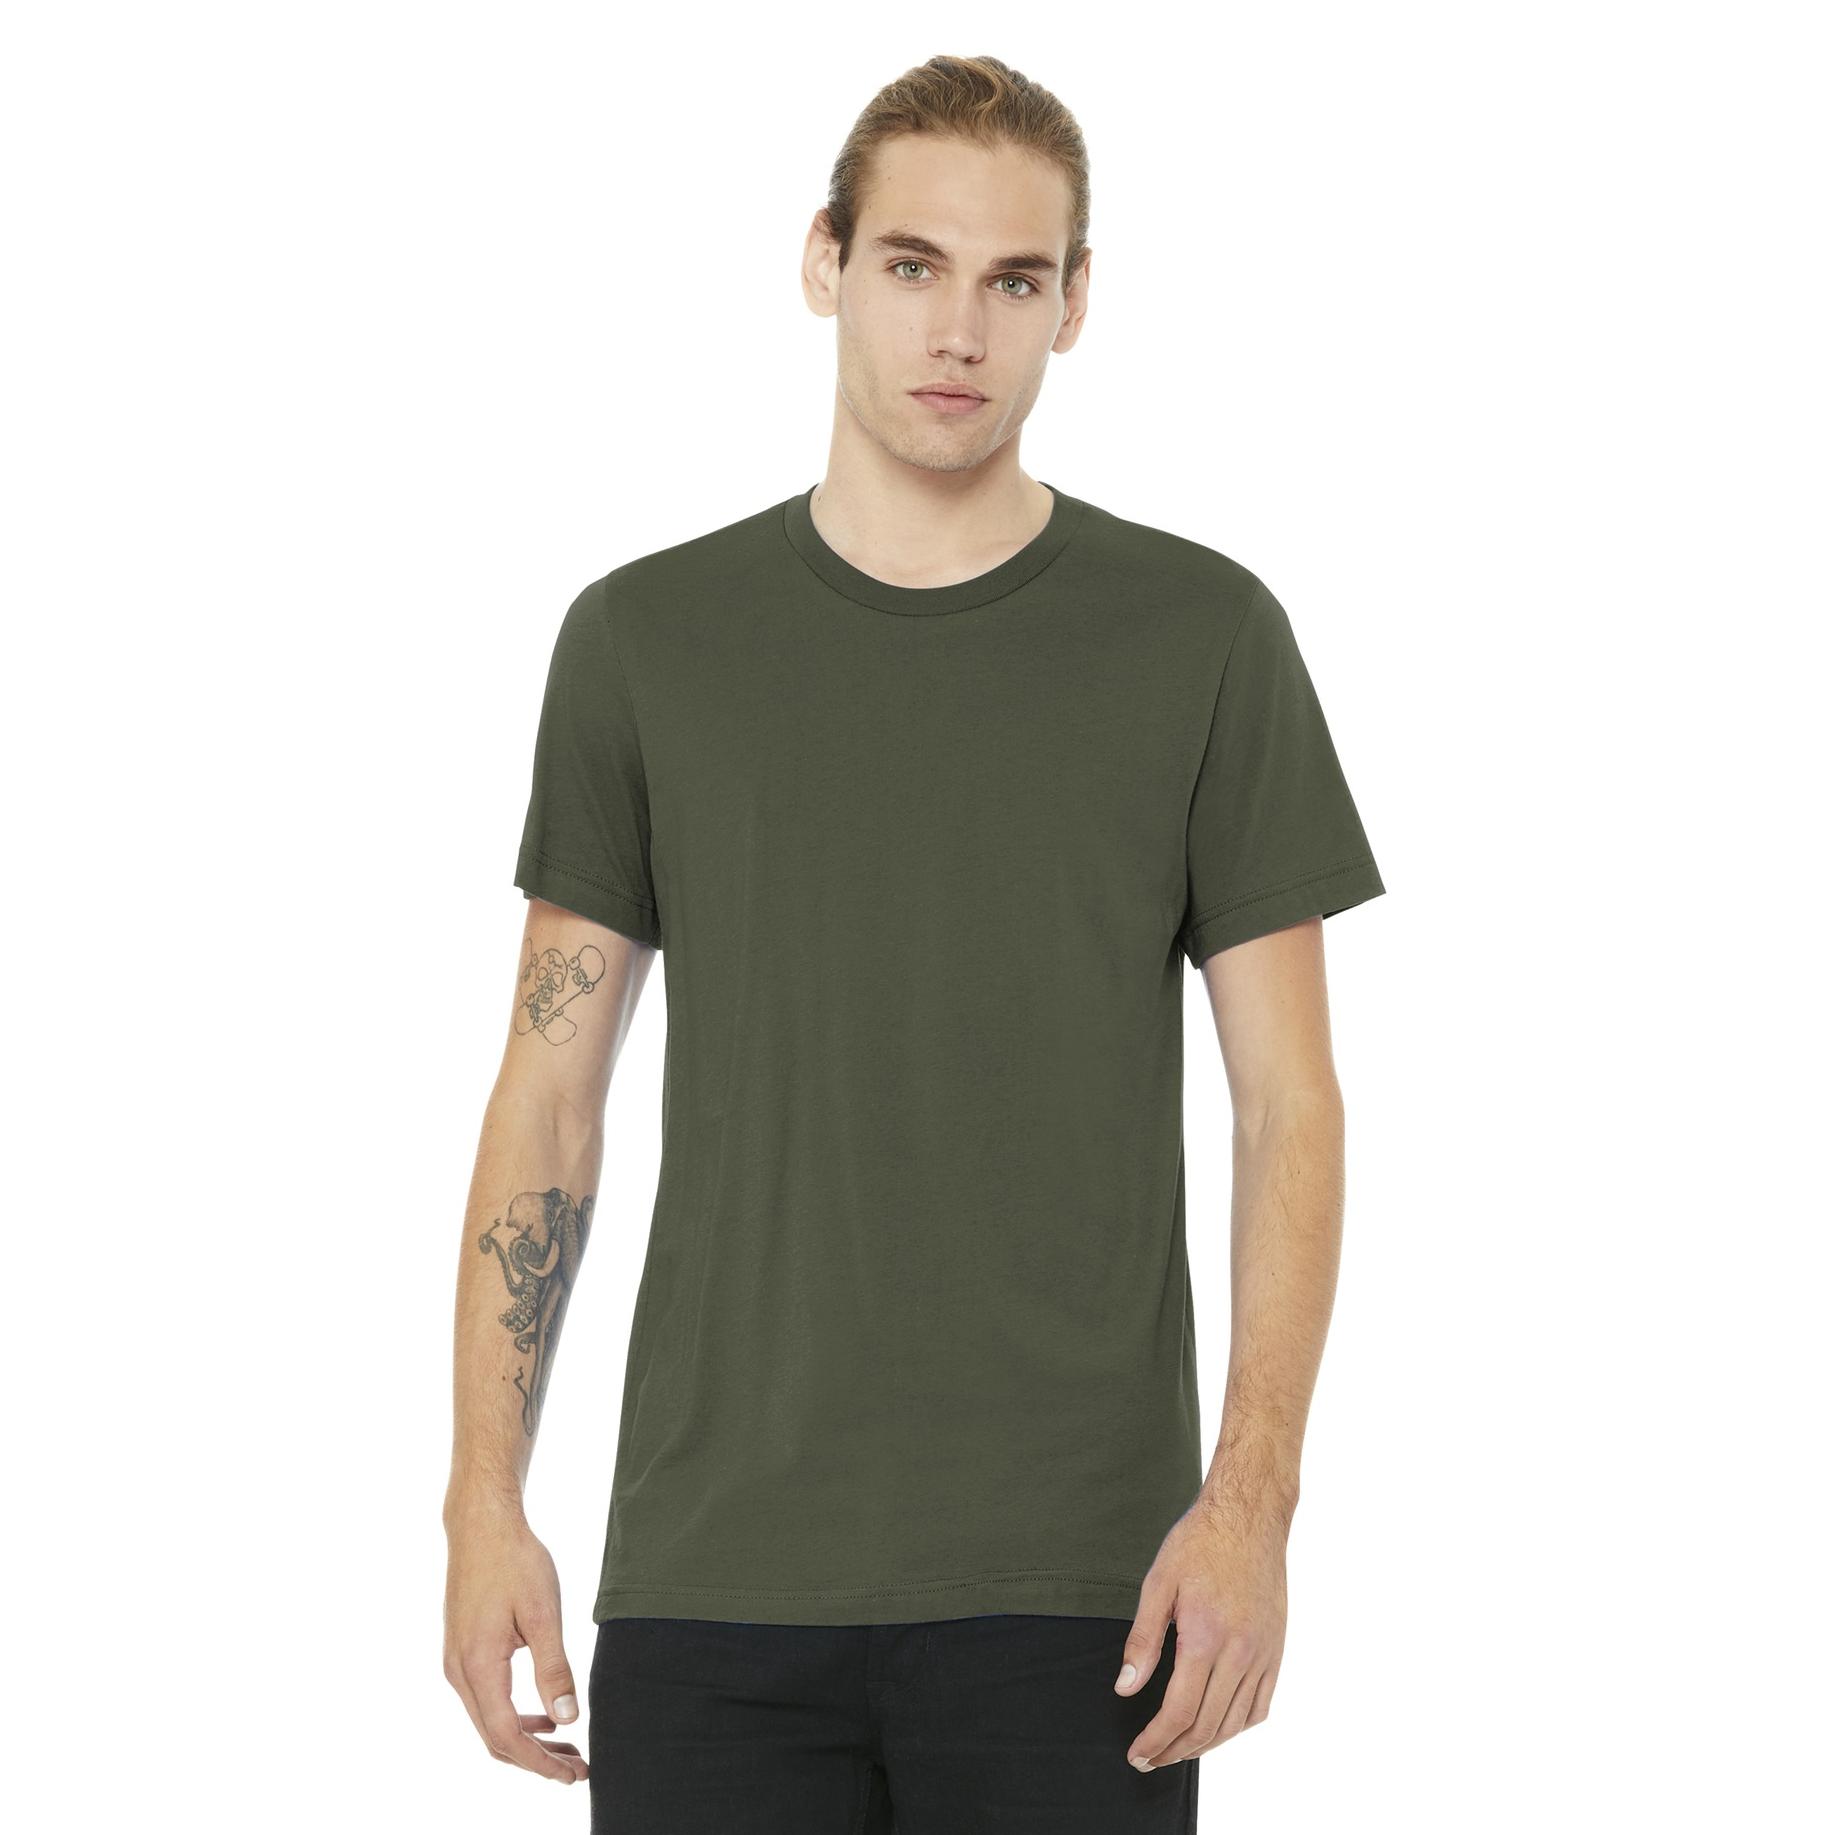 Bella + Canvas BC3001 Unisex Jersey Short Sleeve Tee - Army | Full Source